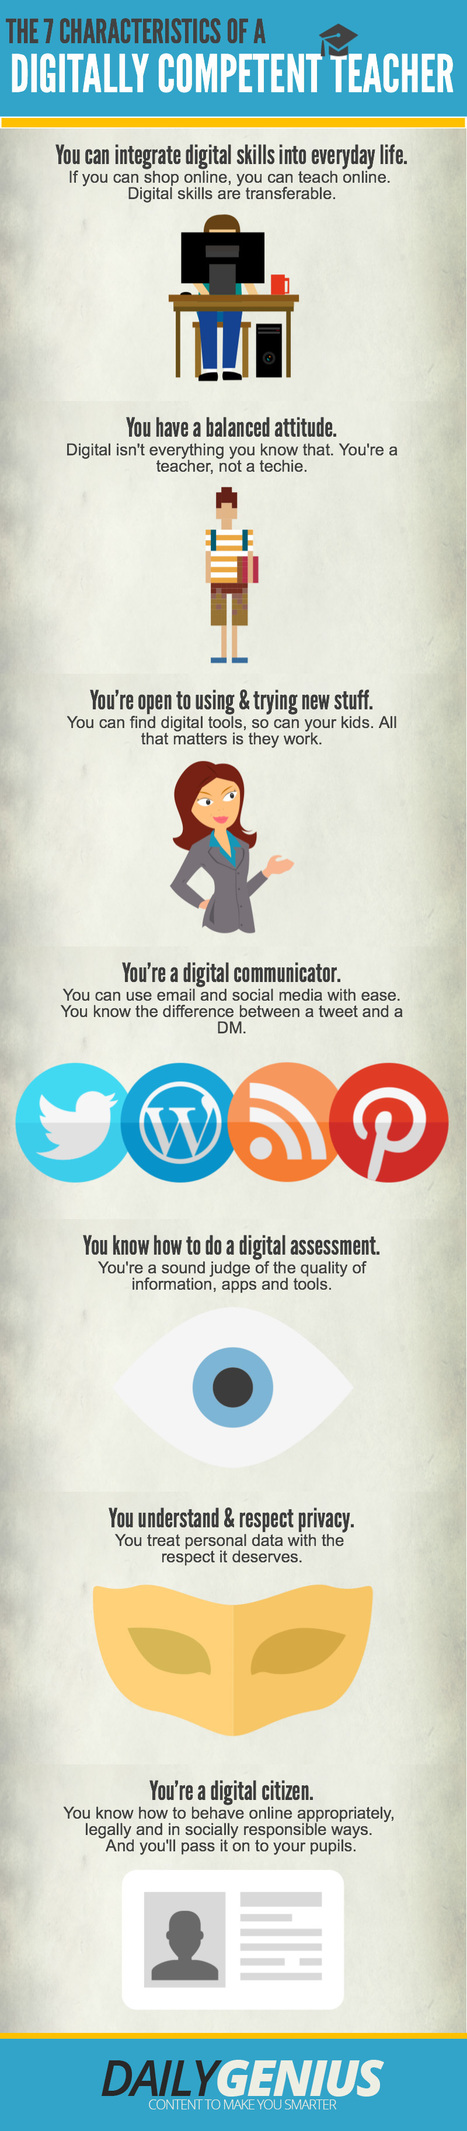 The Characteristics of a Digitally Competent Teacher (Infographic) | 21st Century Learning and Teaching | Scoop.it